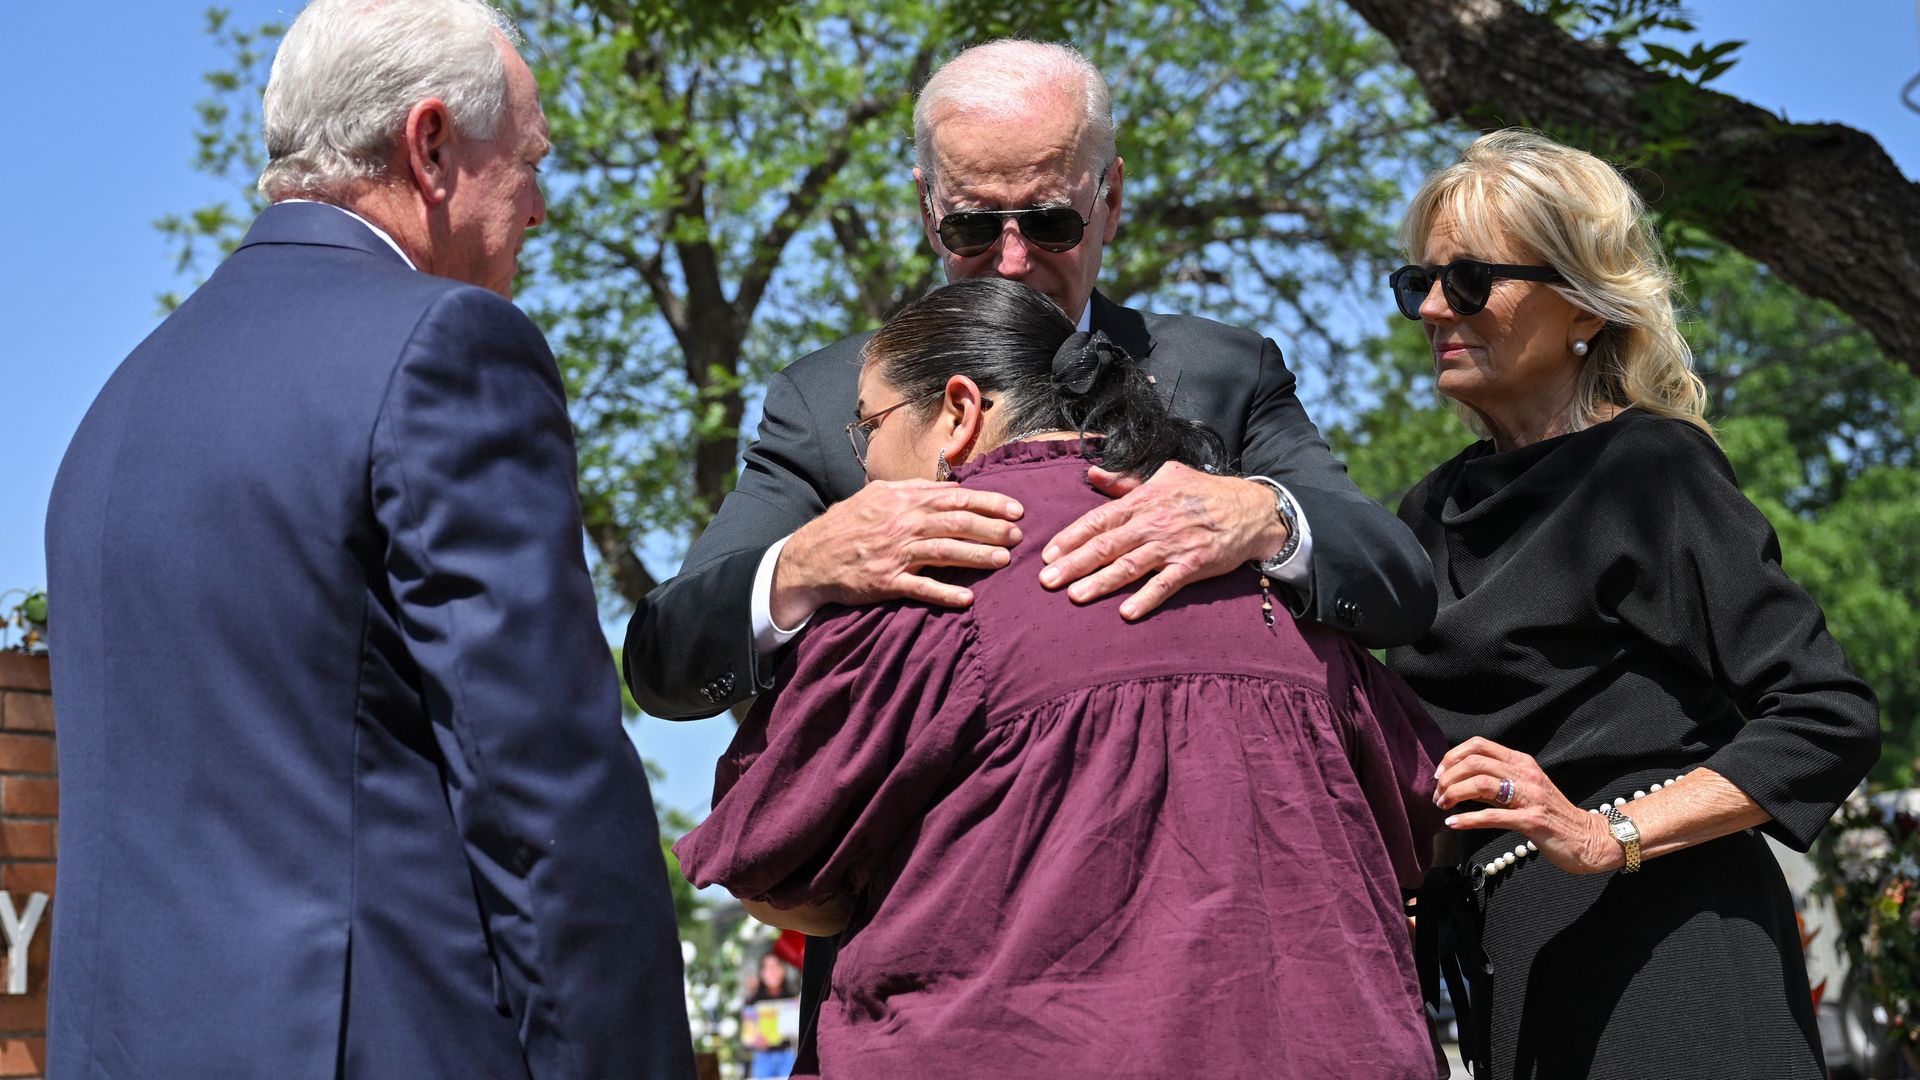 President Joe Biden embraces Mandy Gutierrez, the Priciple of Robb Elementary School, as he and First Lady Jill Biden pay their in Uvalde, Texas on May 29.